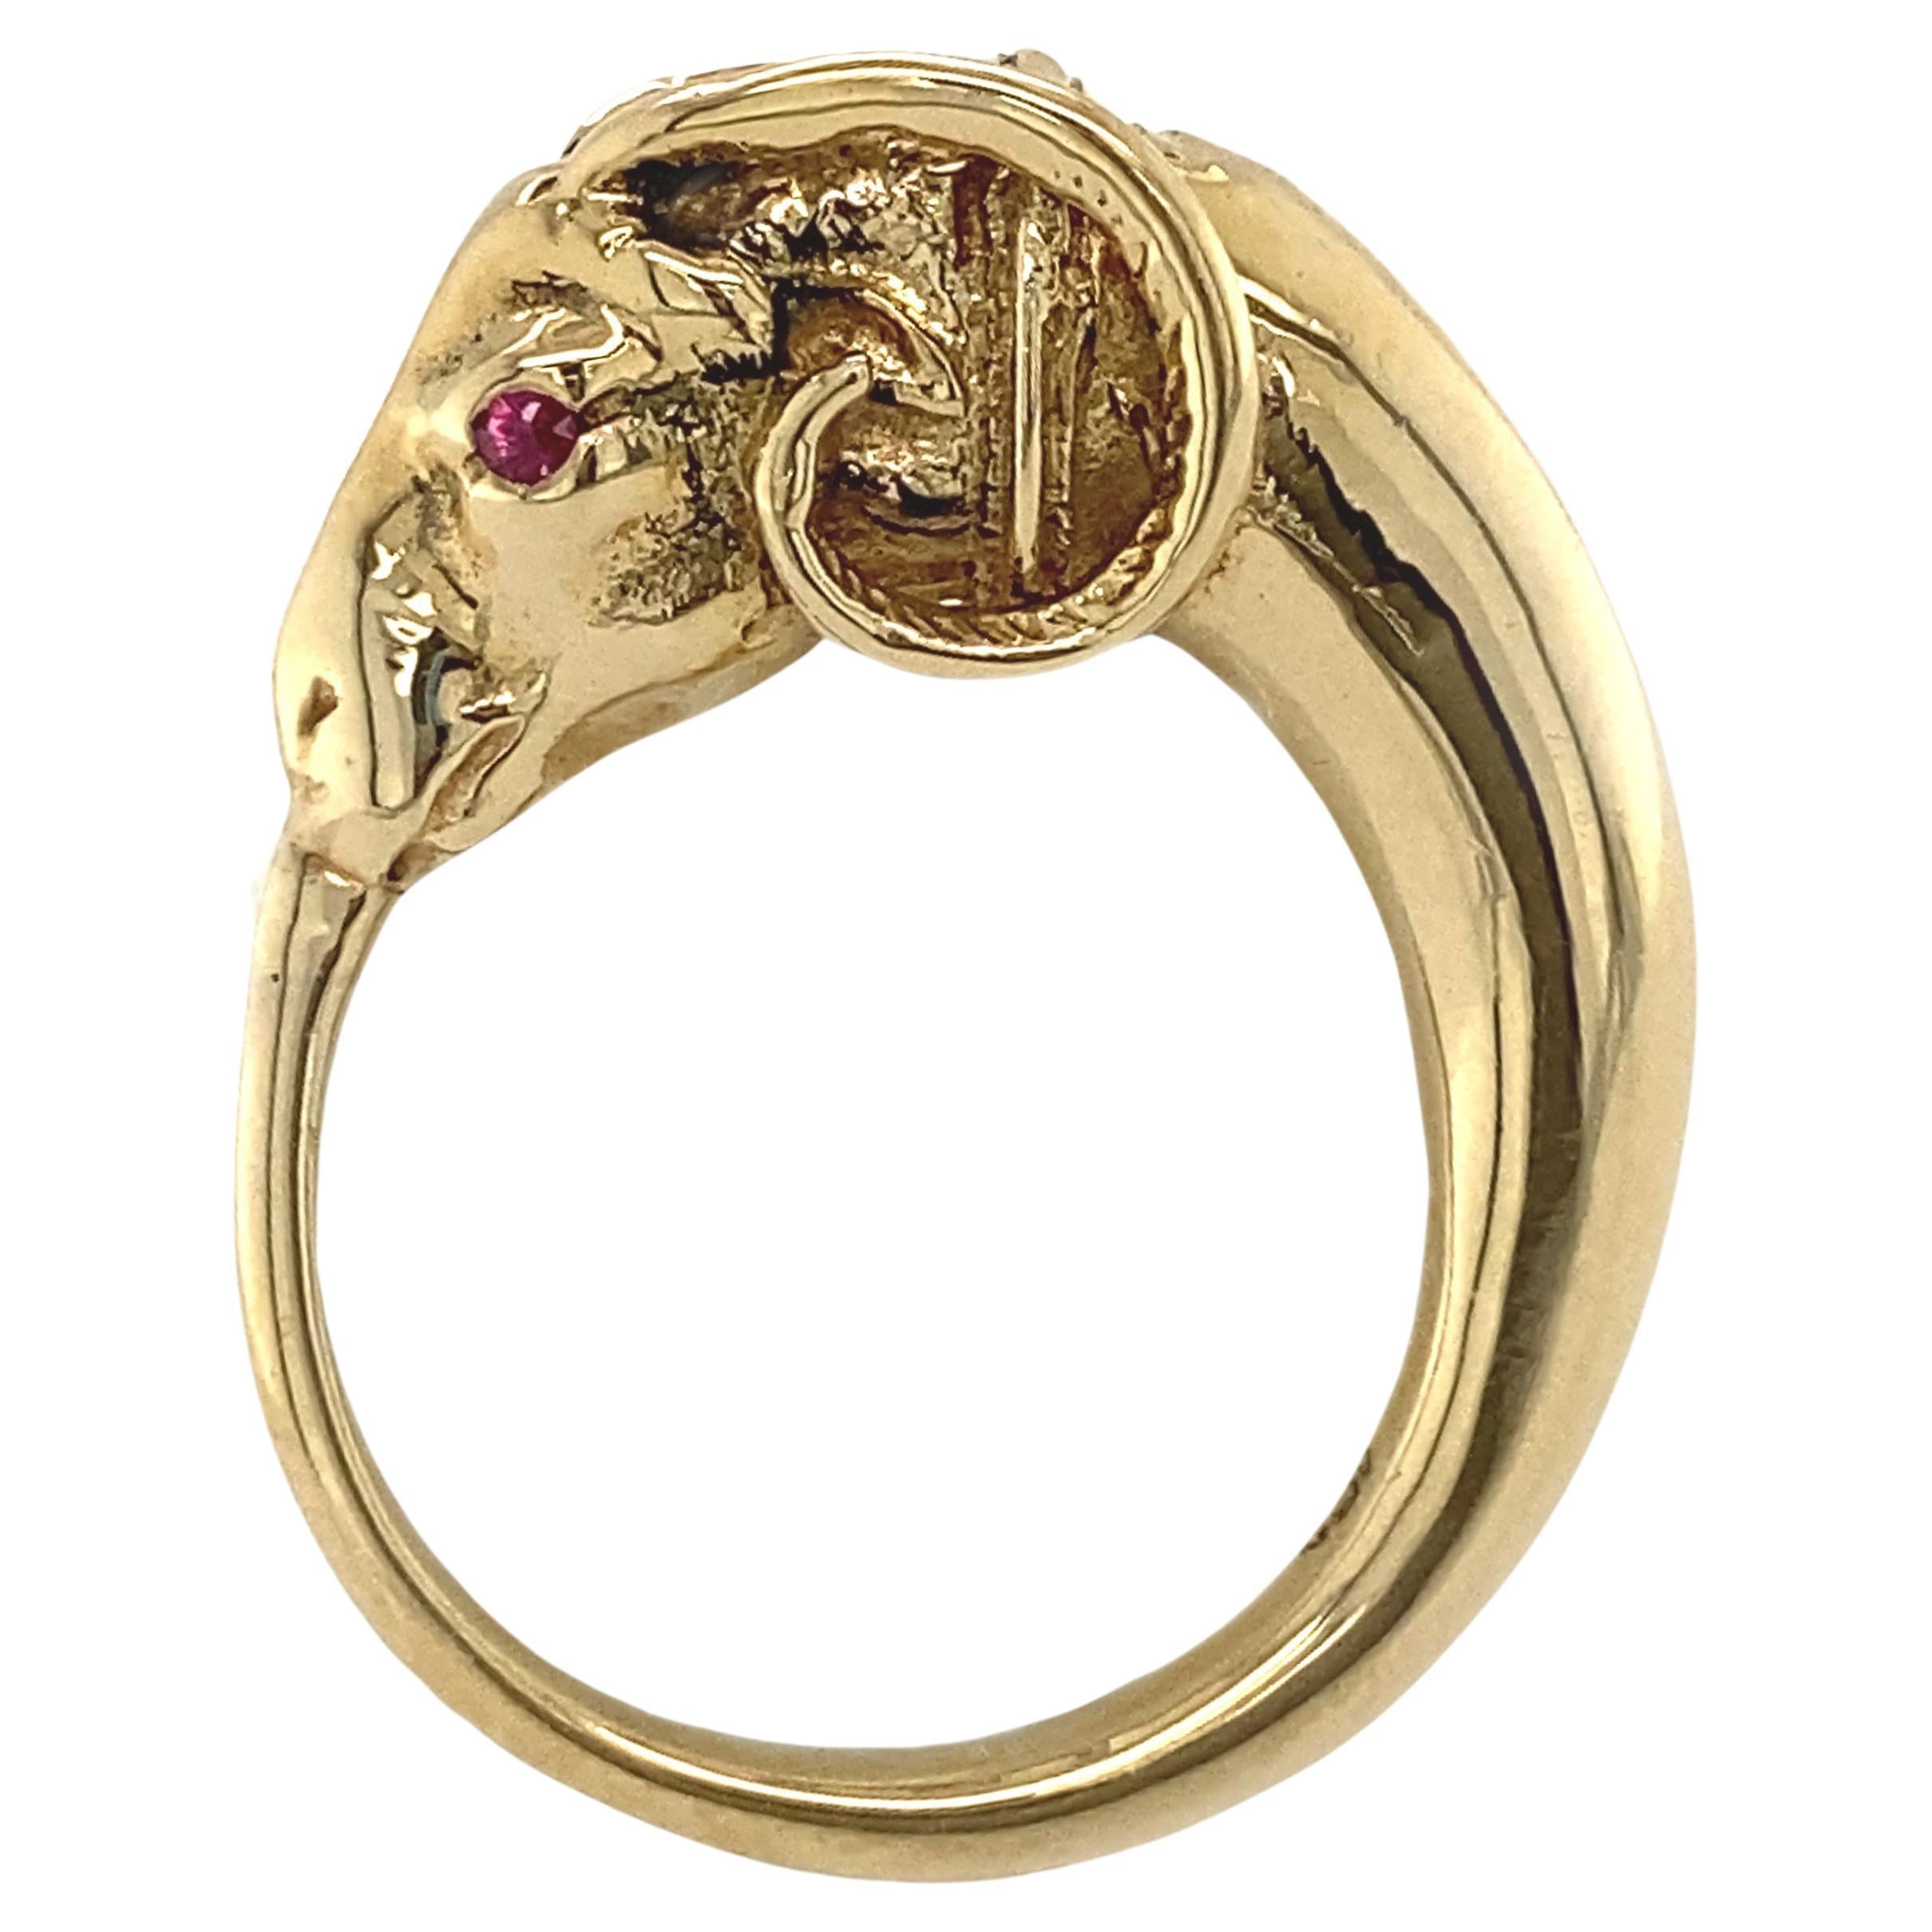 Second Etruscan Revival Figural Ram Ring in 18 Karat Yellow Gold with Ruby Eyes